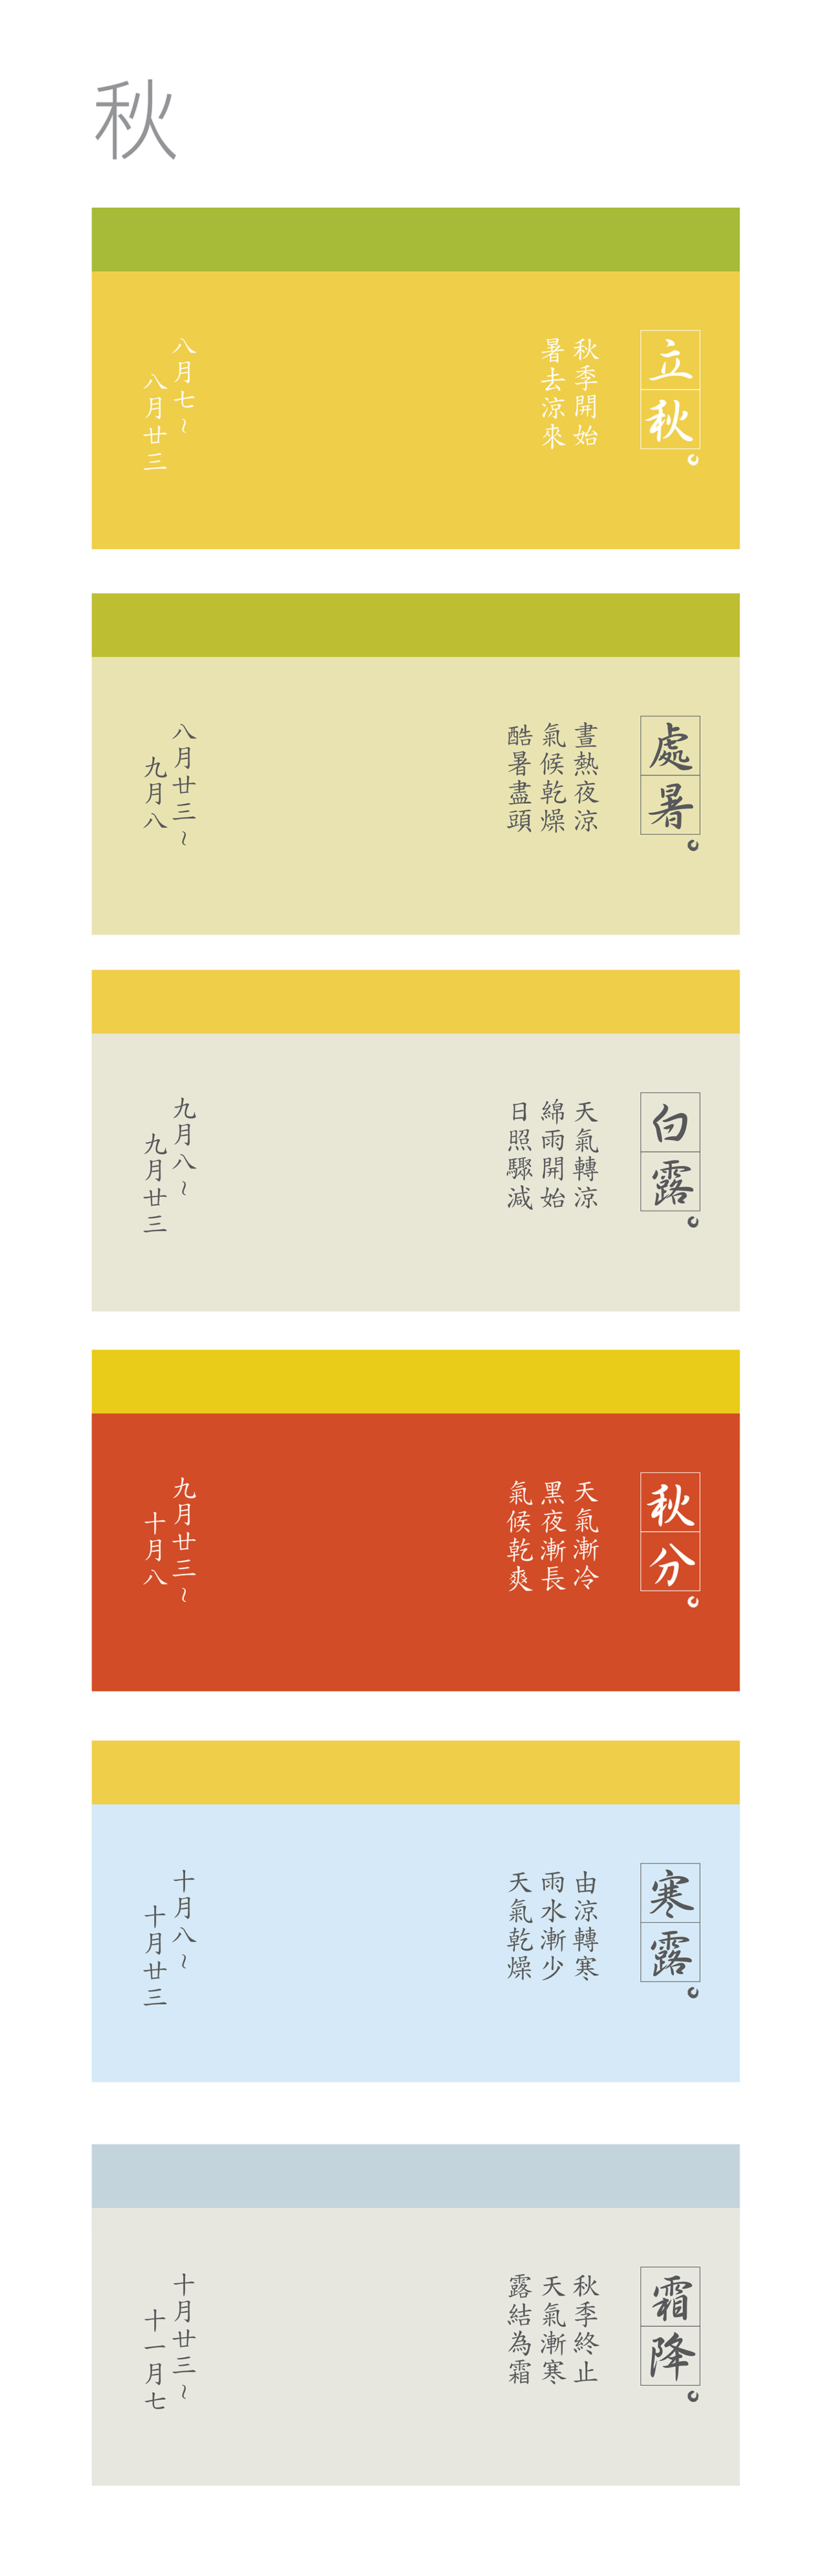 seasons 24 seasons chinese culture lunar calendar agriculture color weather 24節氣 spring autumn summer winter Chinese Character